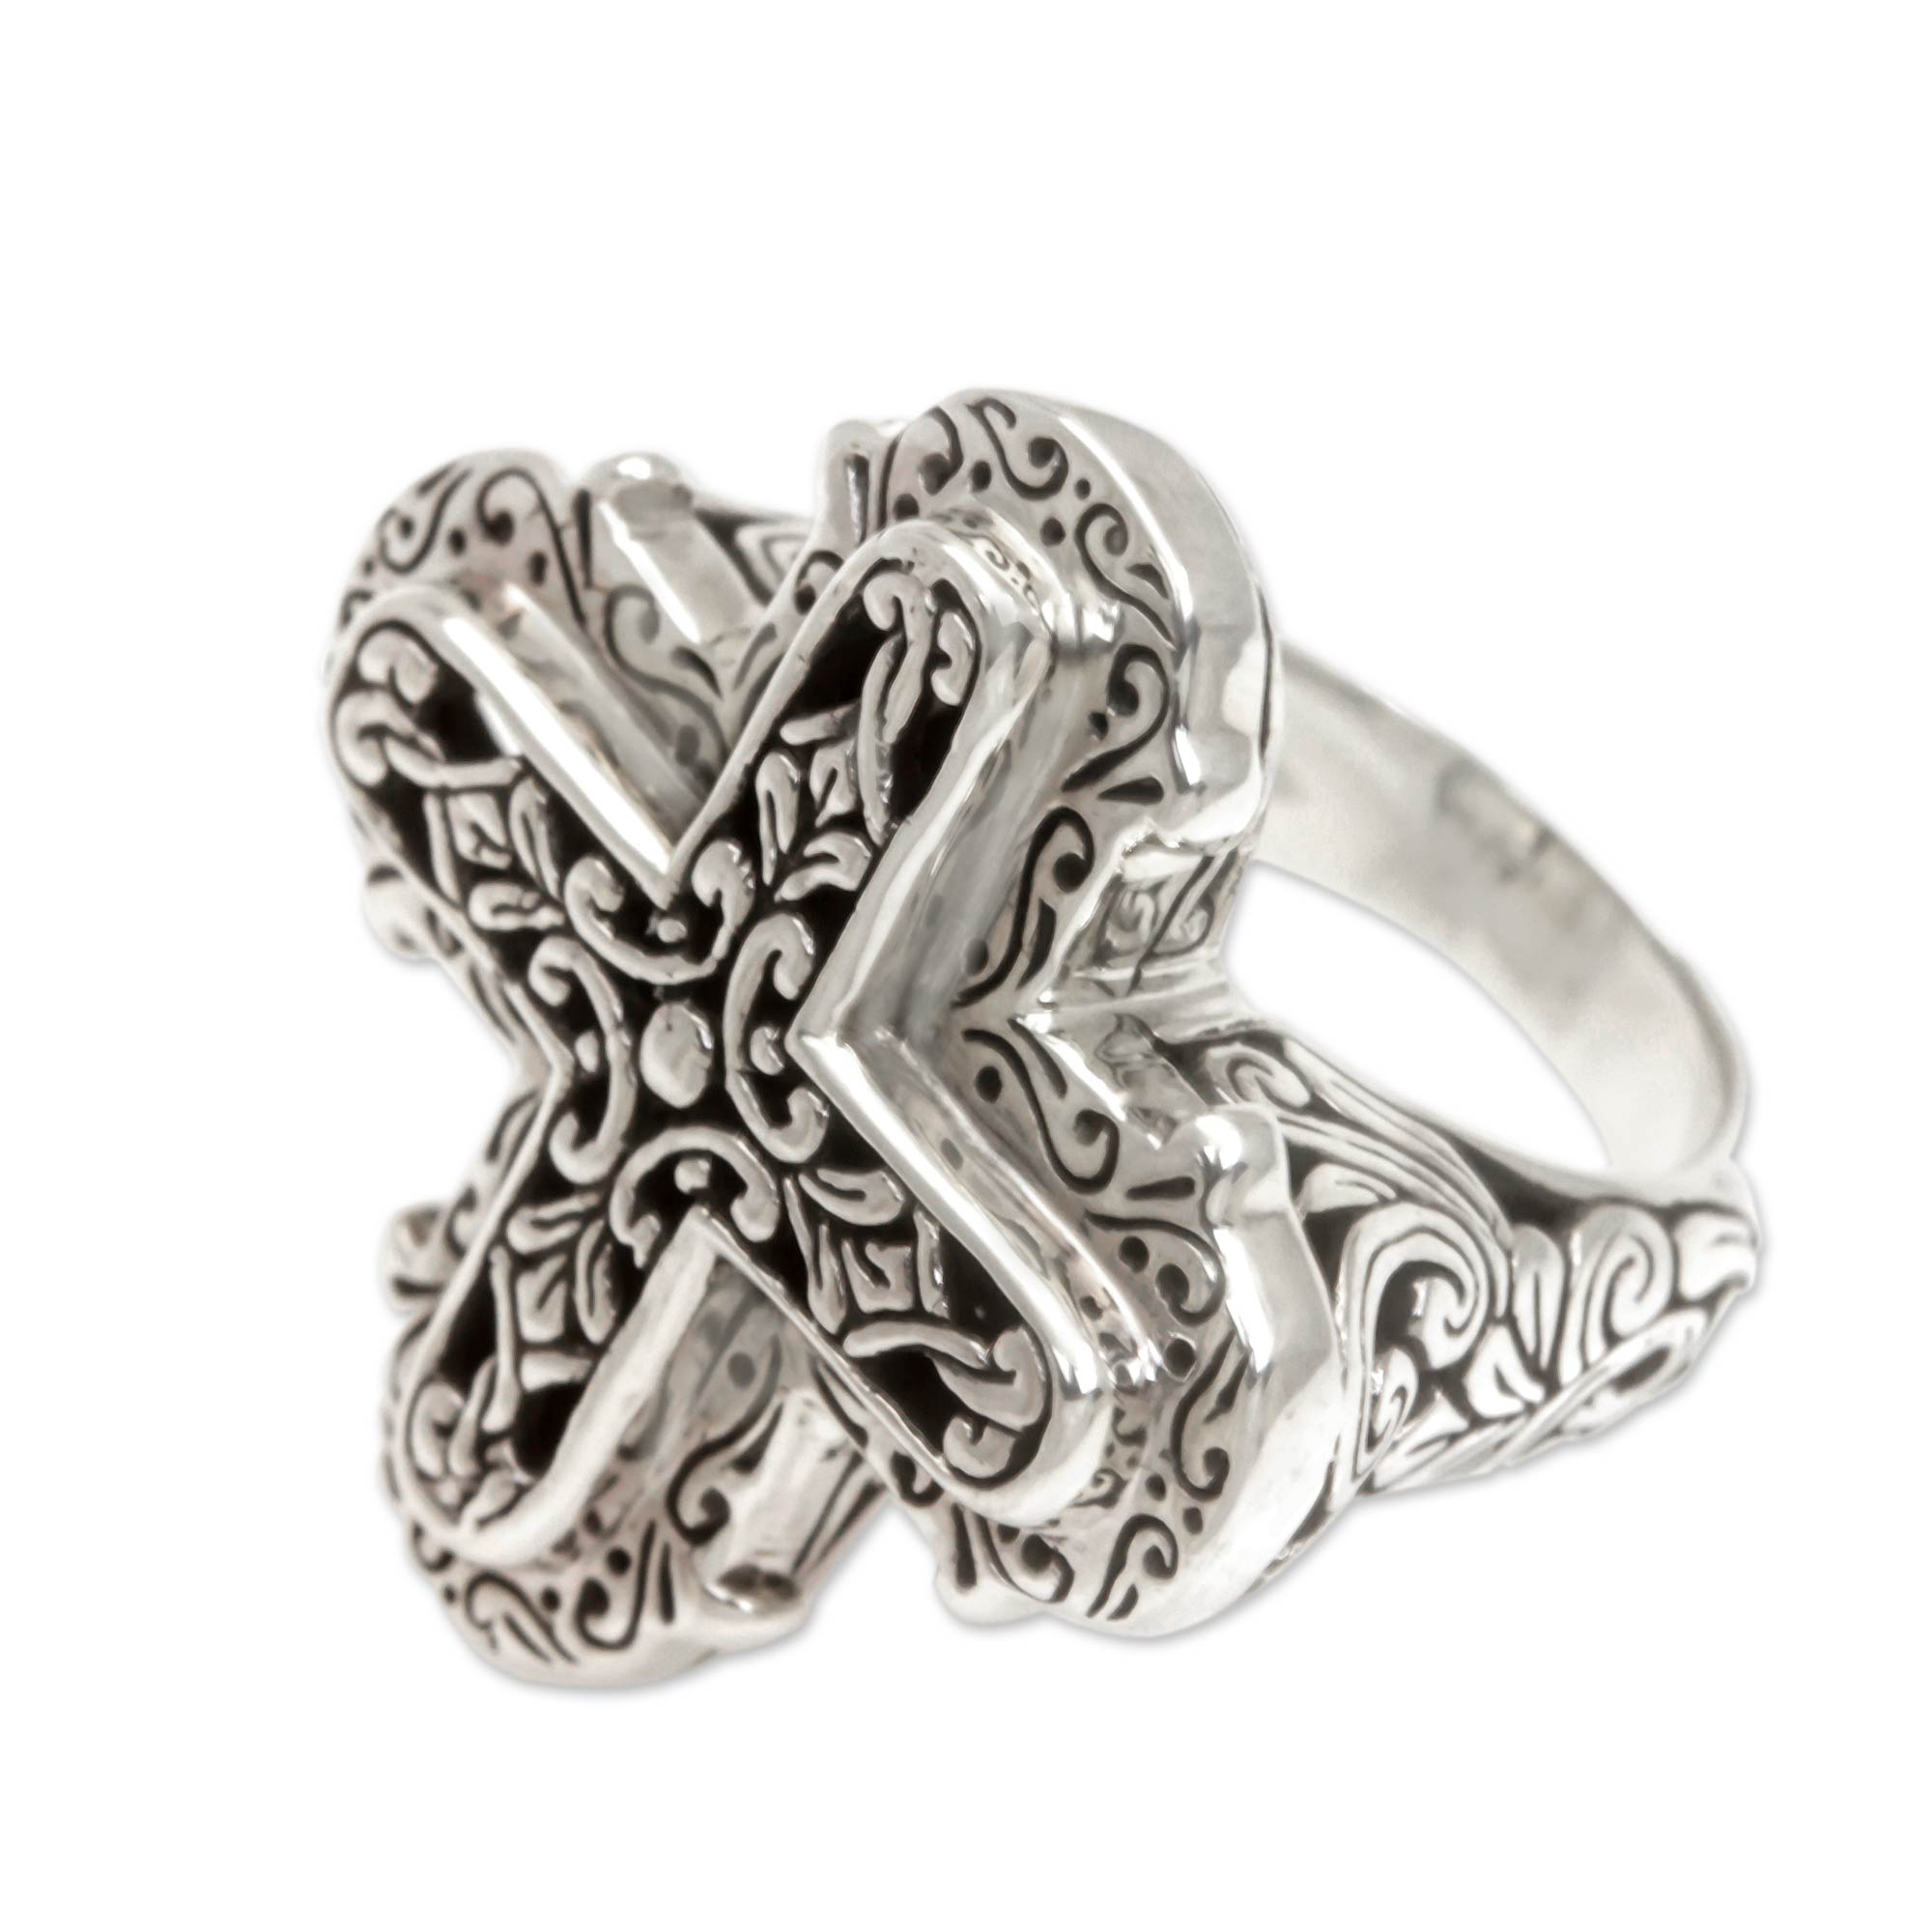 Ornate Sterling Silver Cross Ring from Bali - Glorious Faith | NOVICA